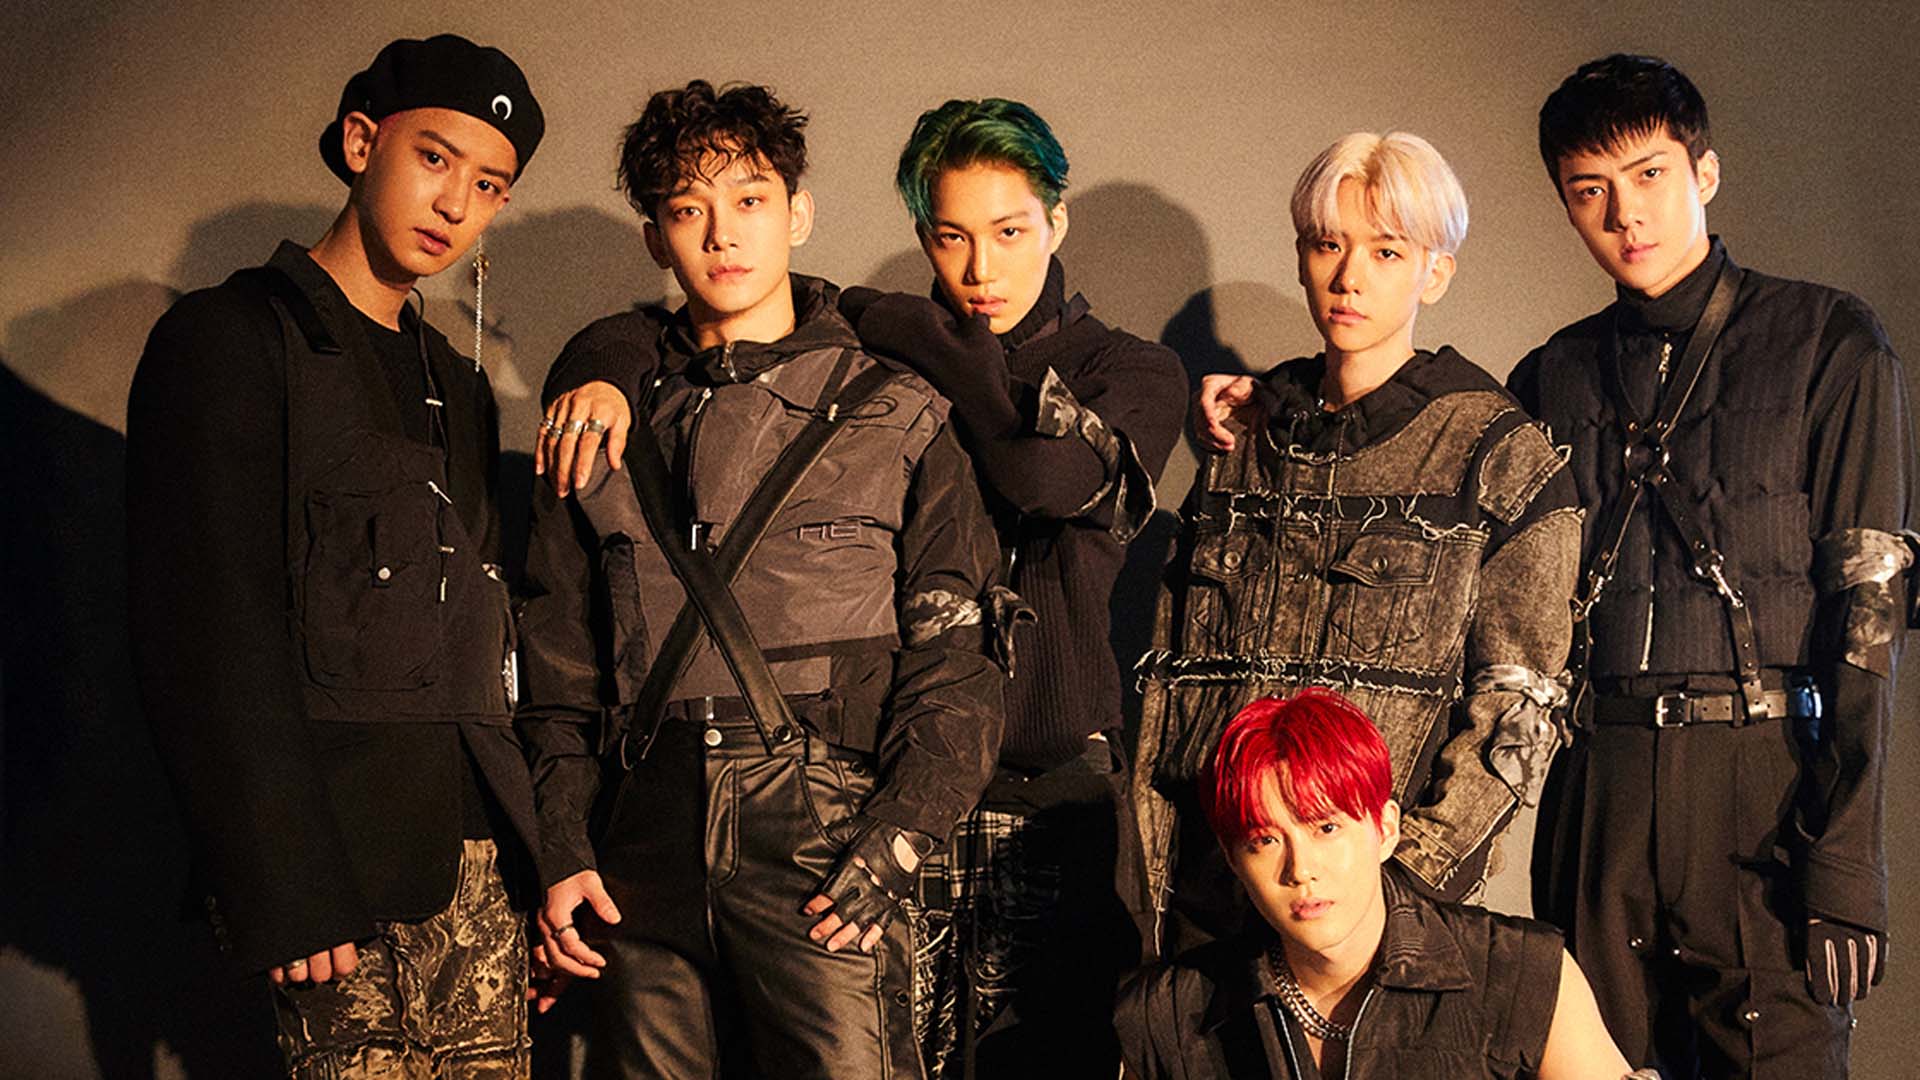 The group EXO (EXO) released its sixth Regular album, Option.It is a new news for about a year since Regular 5th album Dont Mess Up My Tempo released last November.This album includes 10 songs including hip-hop dance song Opsition Korean and Chinese versions, and R & B song Today.Axo has sold more than 1 million copies of all albums released from the 1st to the 5th album.Articles and tips: Katok/Line jebo23end